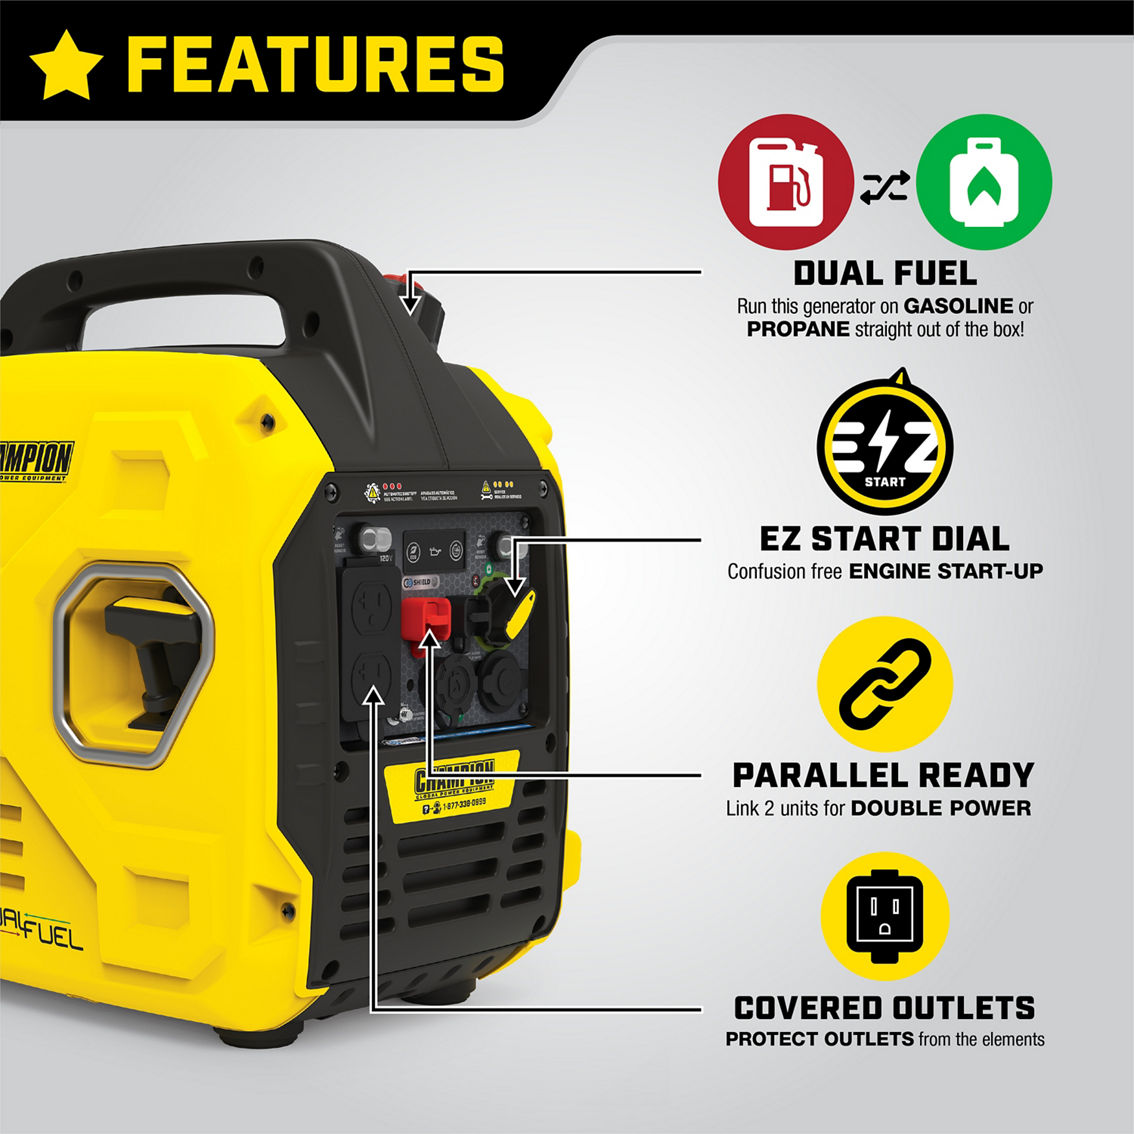 Champion 2500W Ultralight Portable Dual Fuel Inverter Generator with CO Shield - Image 8 of 10